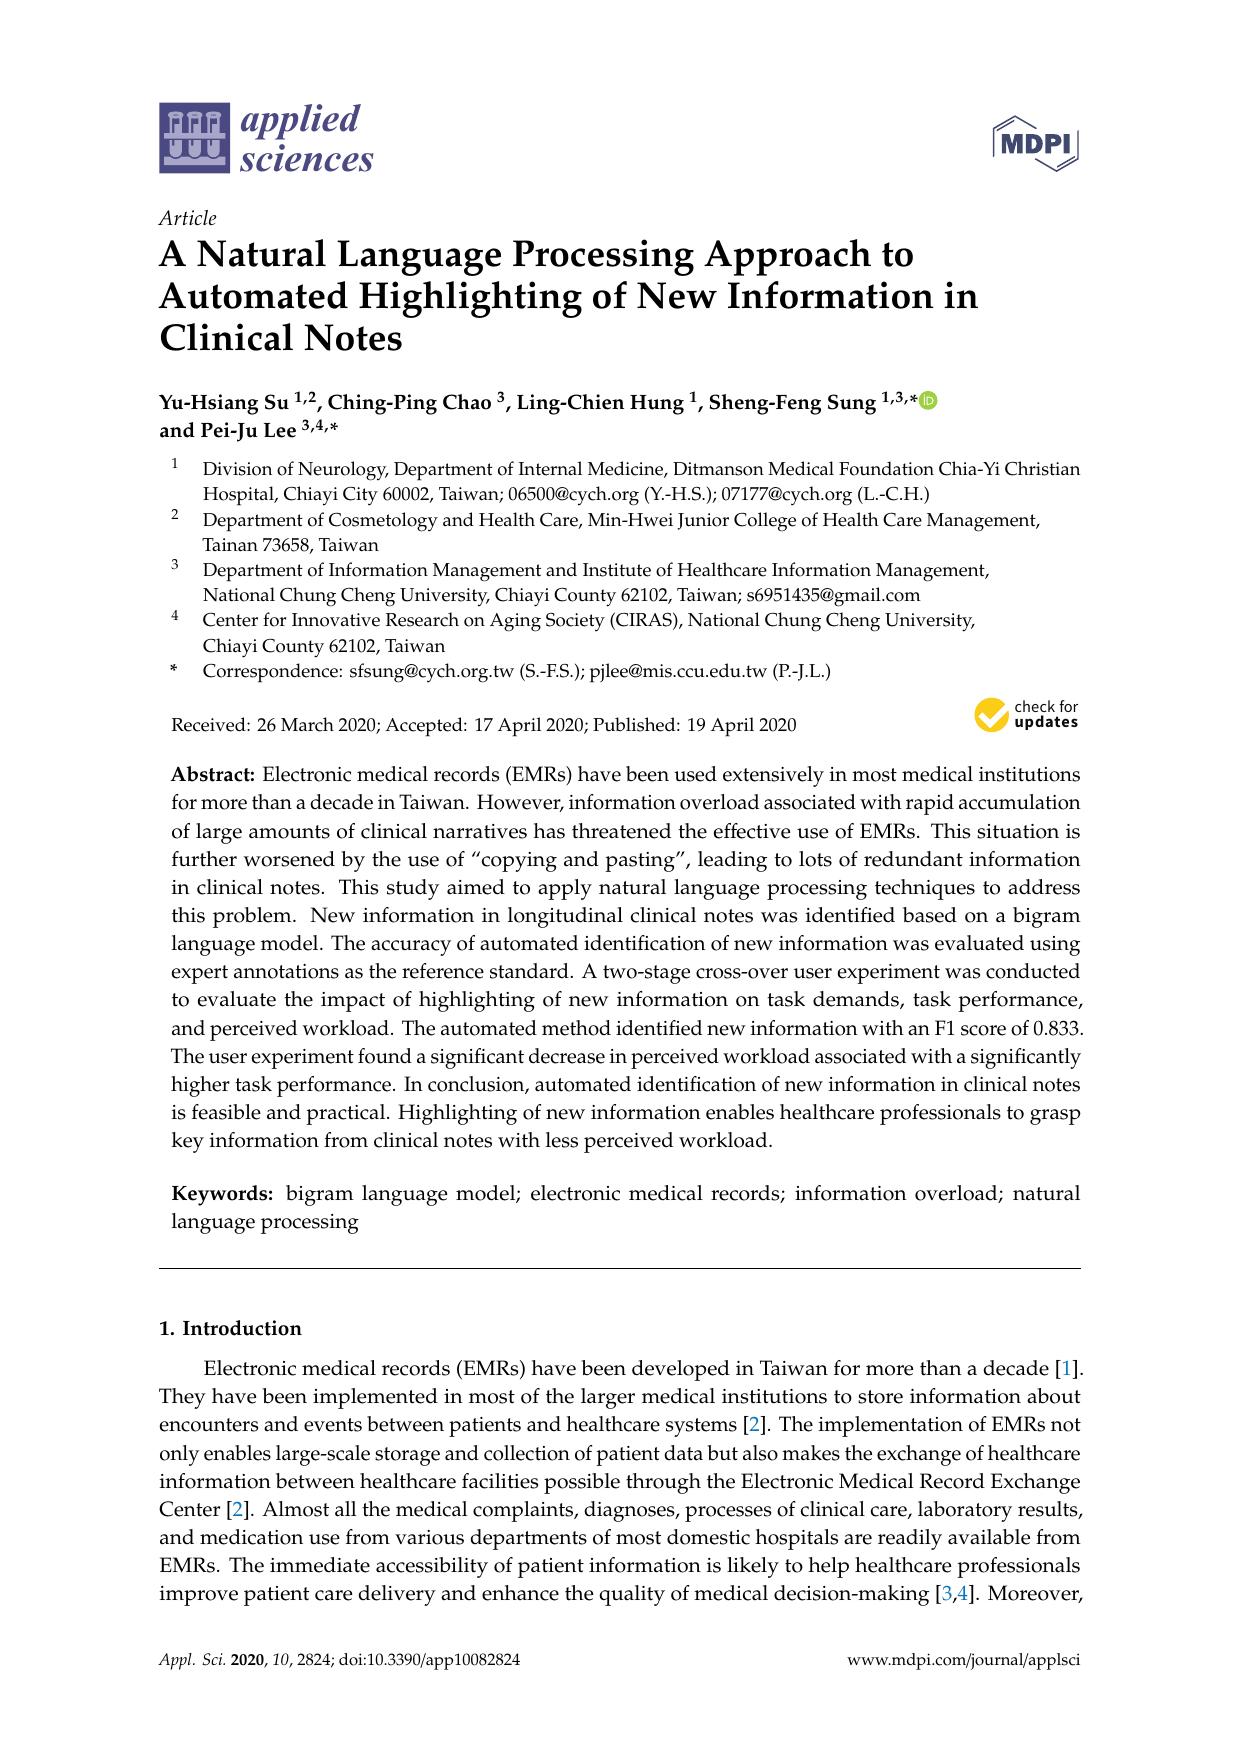 A Natural Language Processing Approach to Automated Highlighting of New Information in Clinical Notes